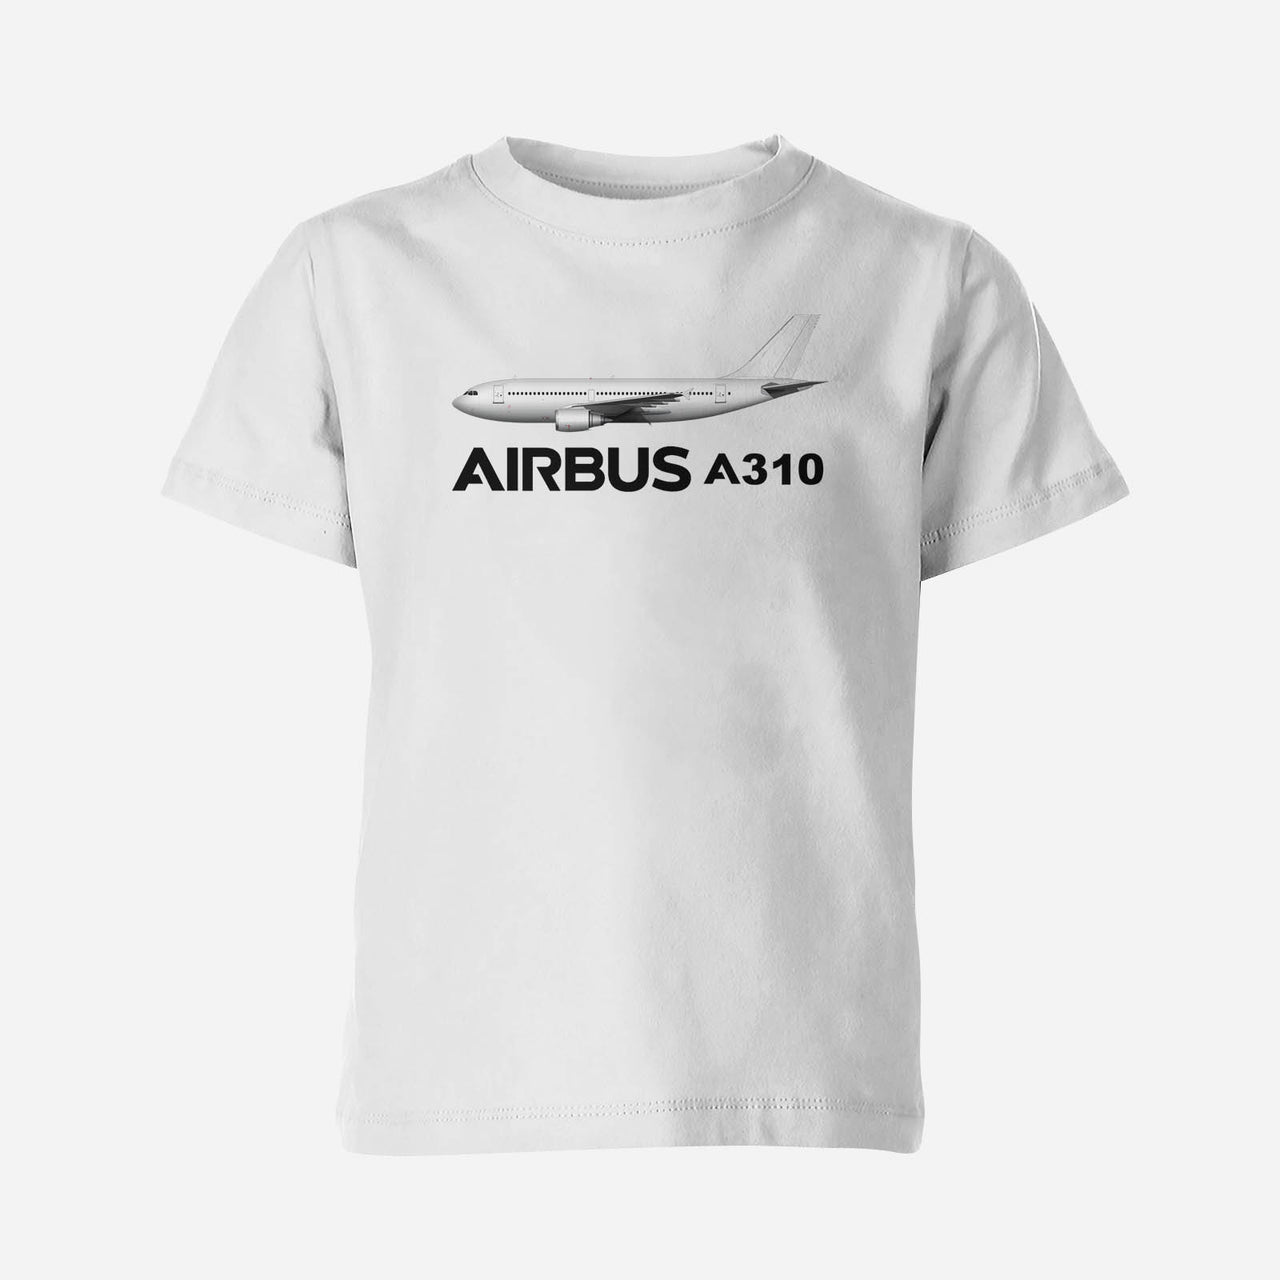 The Airbus A310 Designed Children T-Shirts